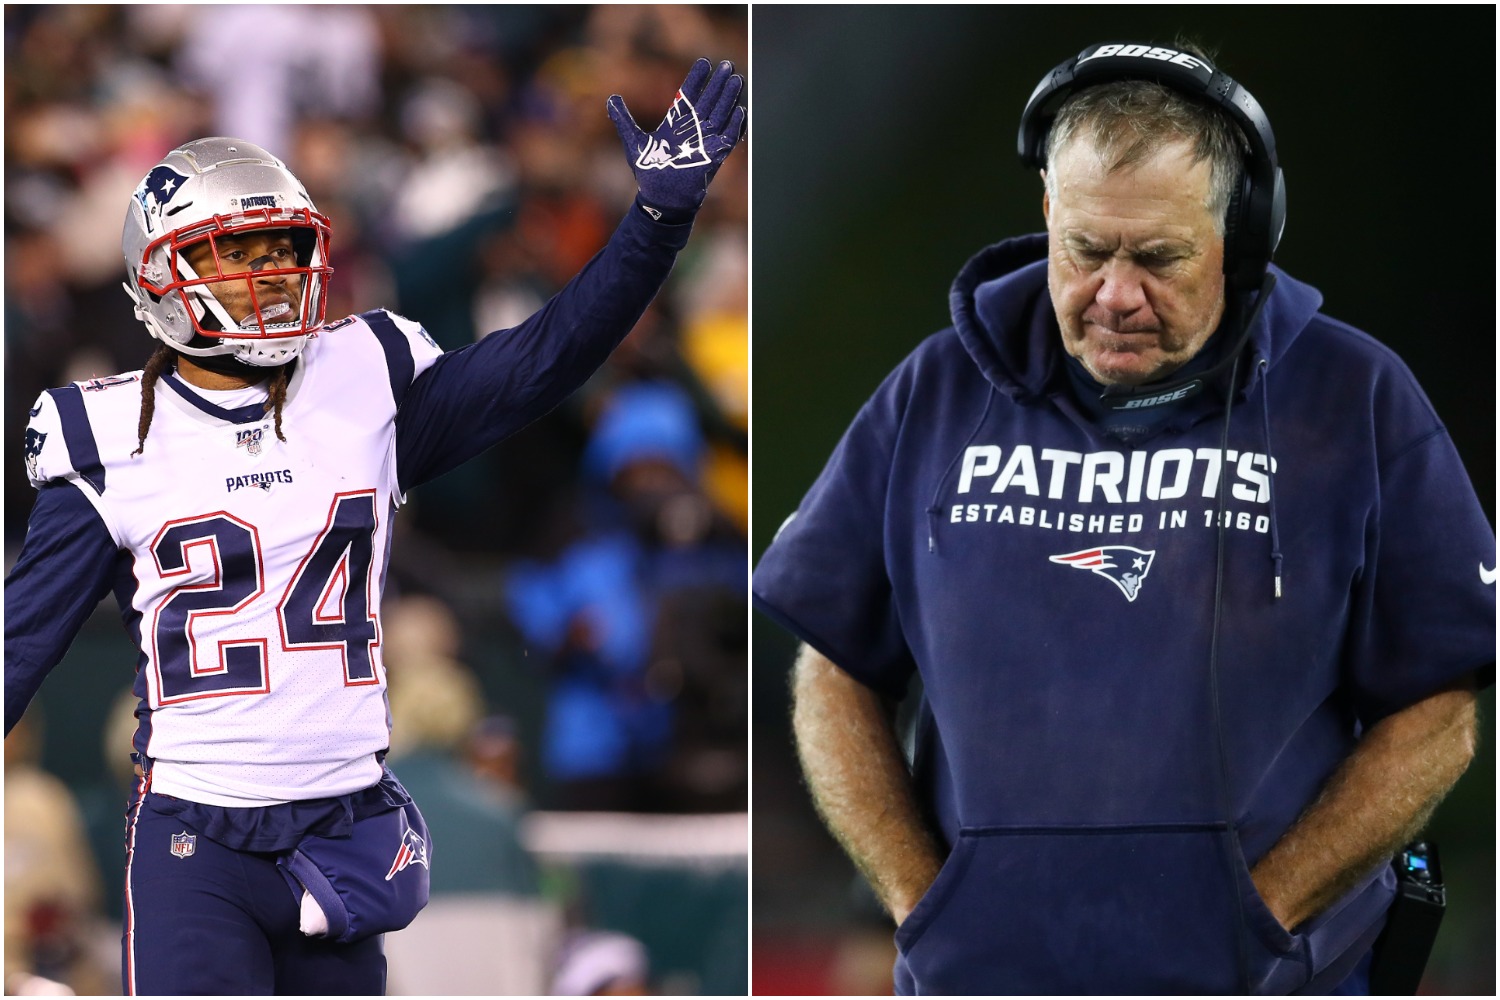 New England Patriots cornerback Stephon Gilmore gestures during a game as Bill Belichick looks down on the sidelines.